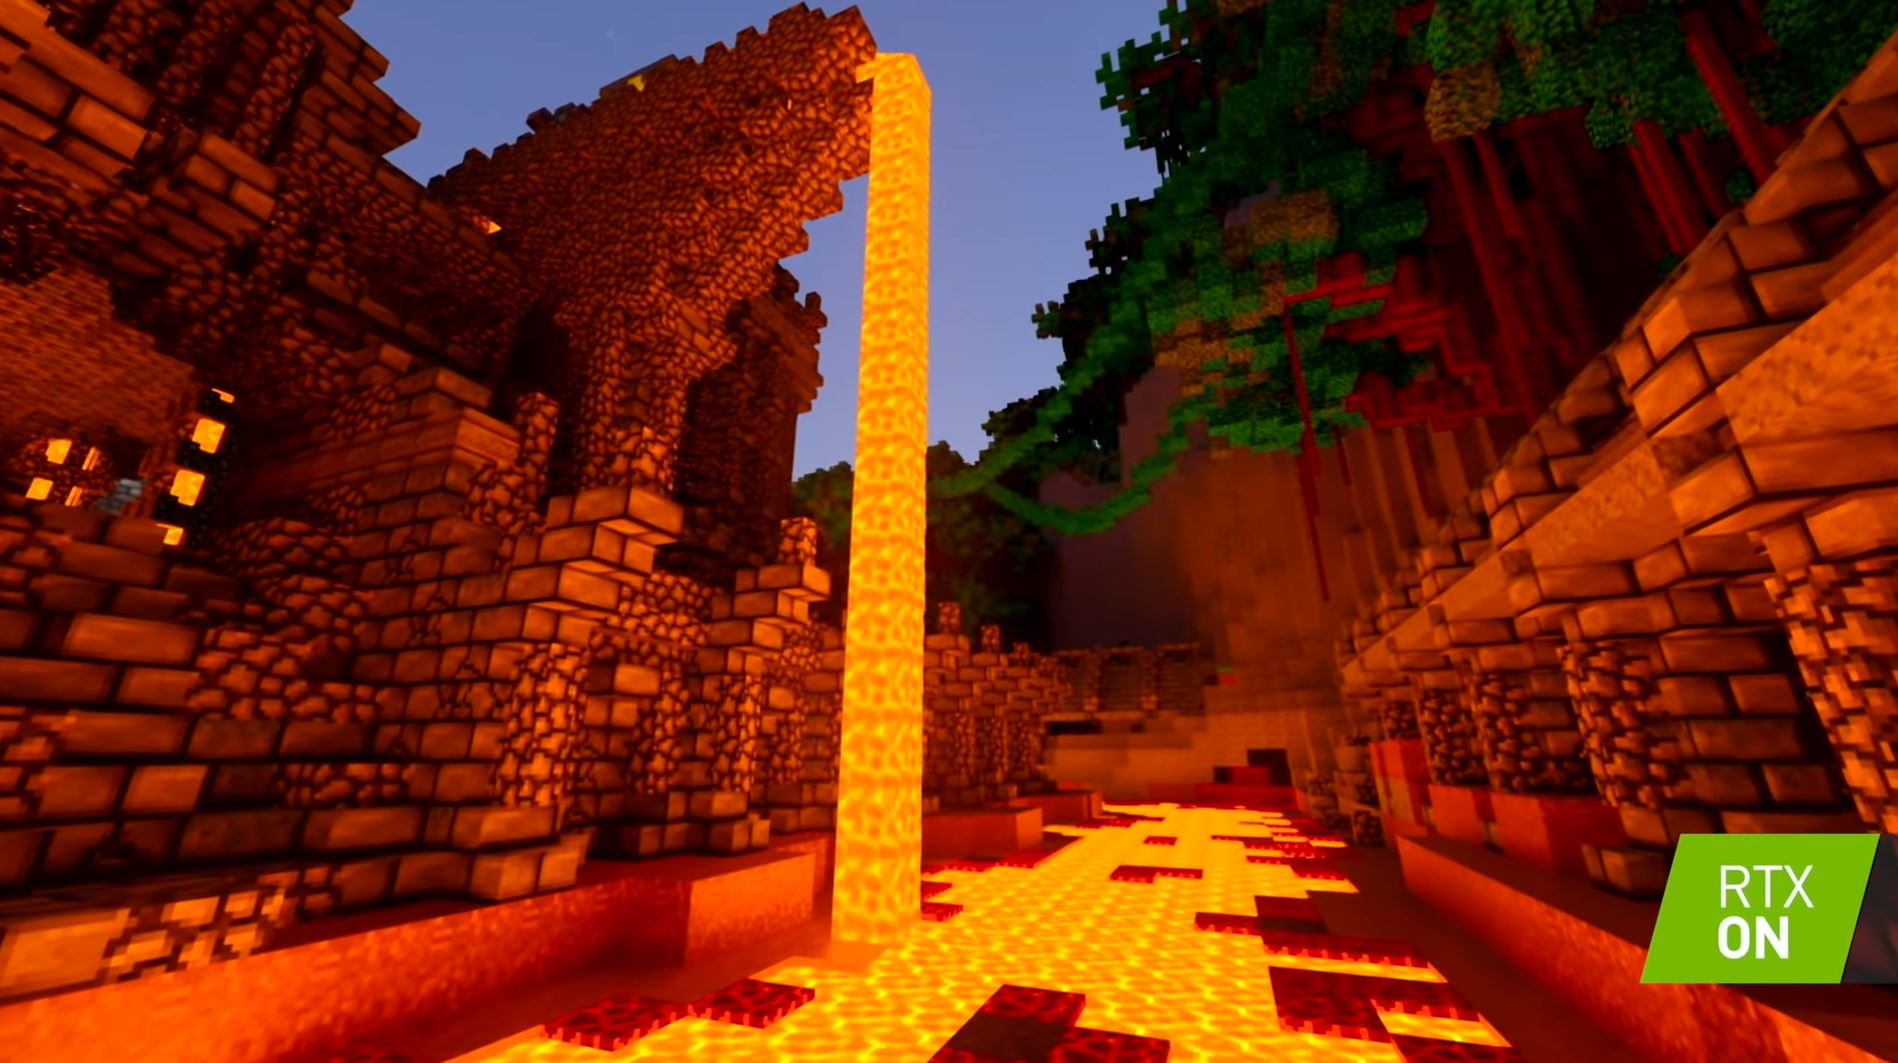 Minecraft RTX beta is now available: Here's how to get in - SlashGear